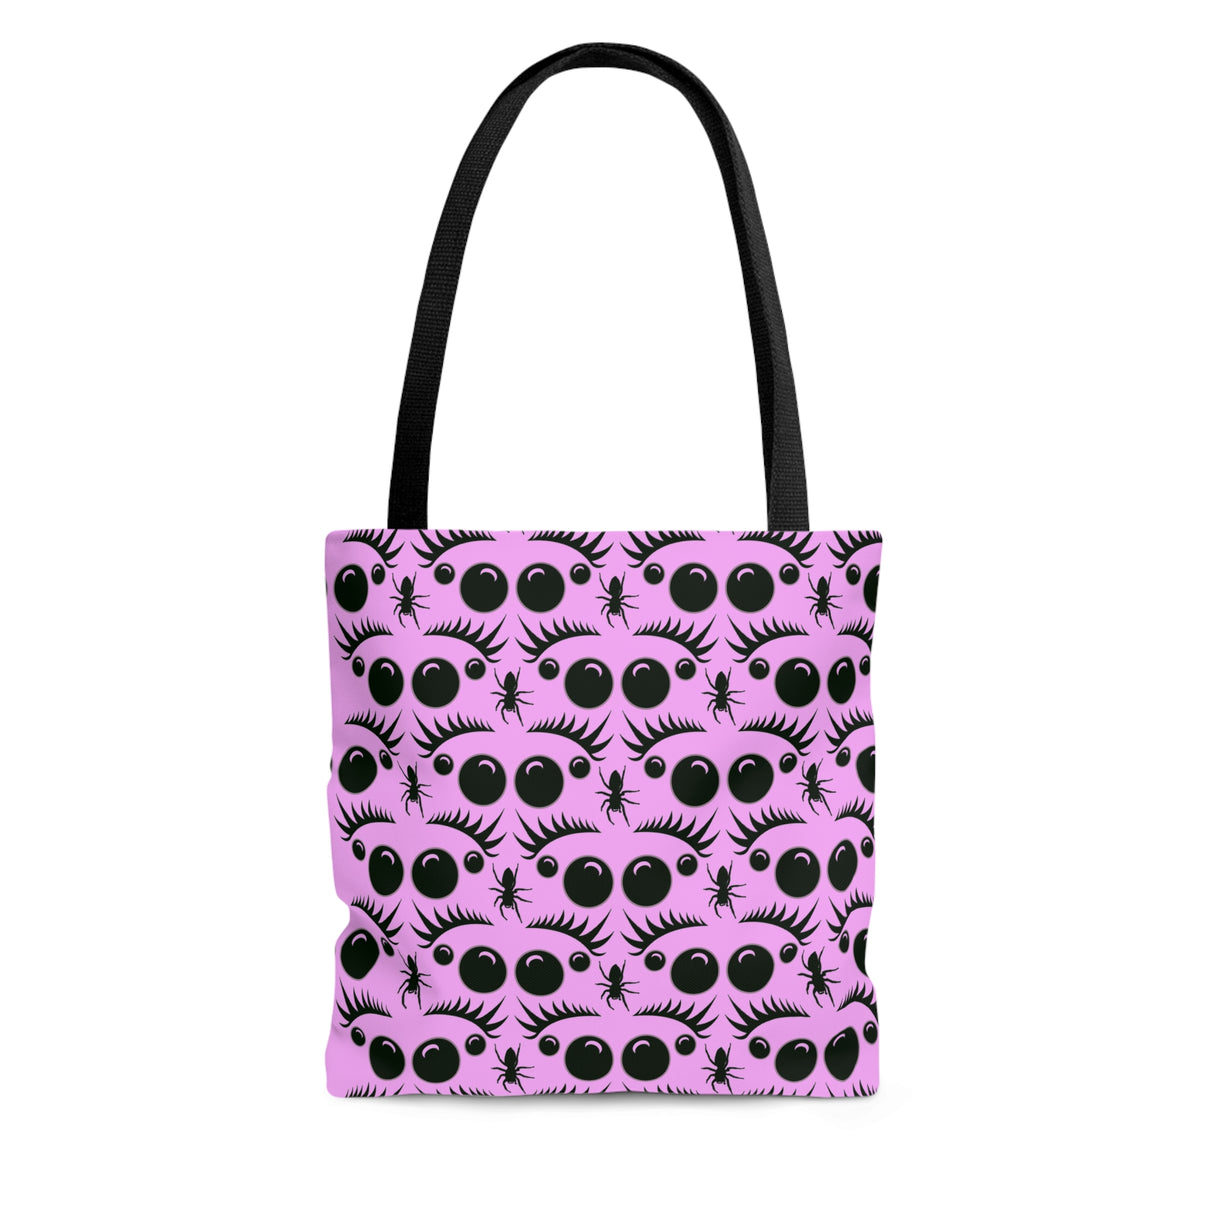 Jumping Spider Tote Bag Featuring Black&Pink Jumping Spider Print.